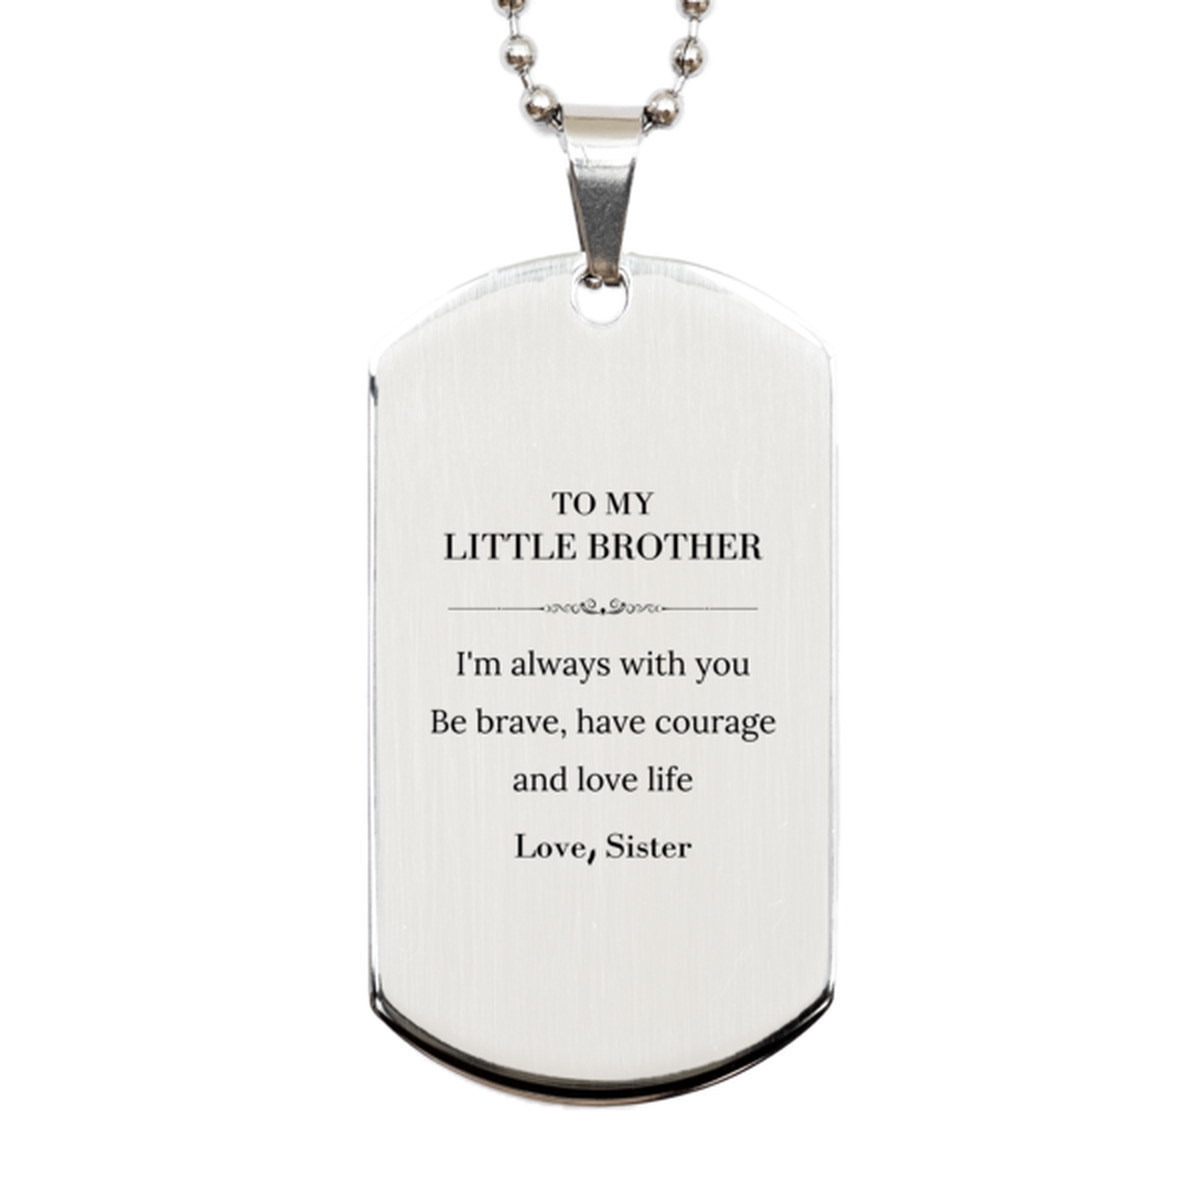 To My Little Brother Gifts from Sister, Unique Silver Dog Tag Inspirational Christmas Birthday Graduation Gifts for Little Brother I'm always with you. Be brave, have courage and love life. Love, Sister